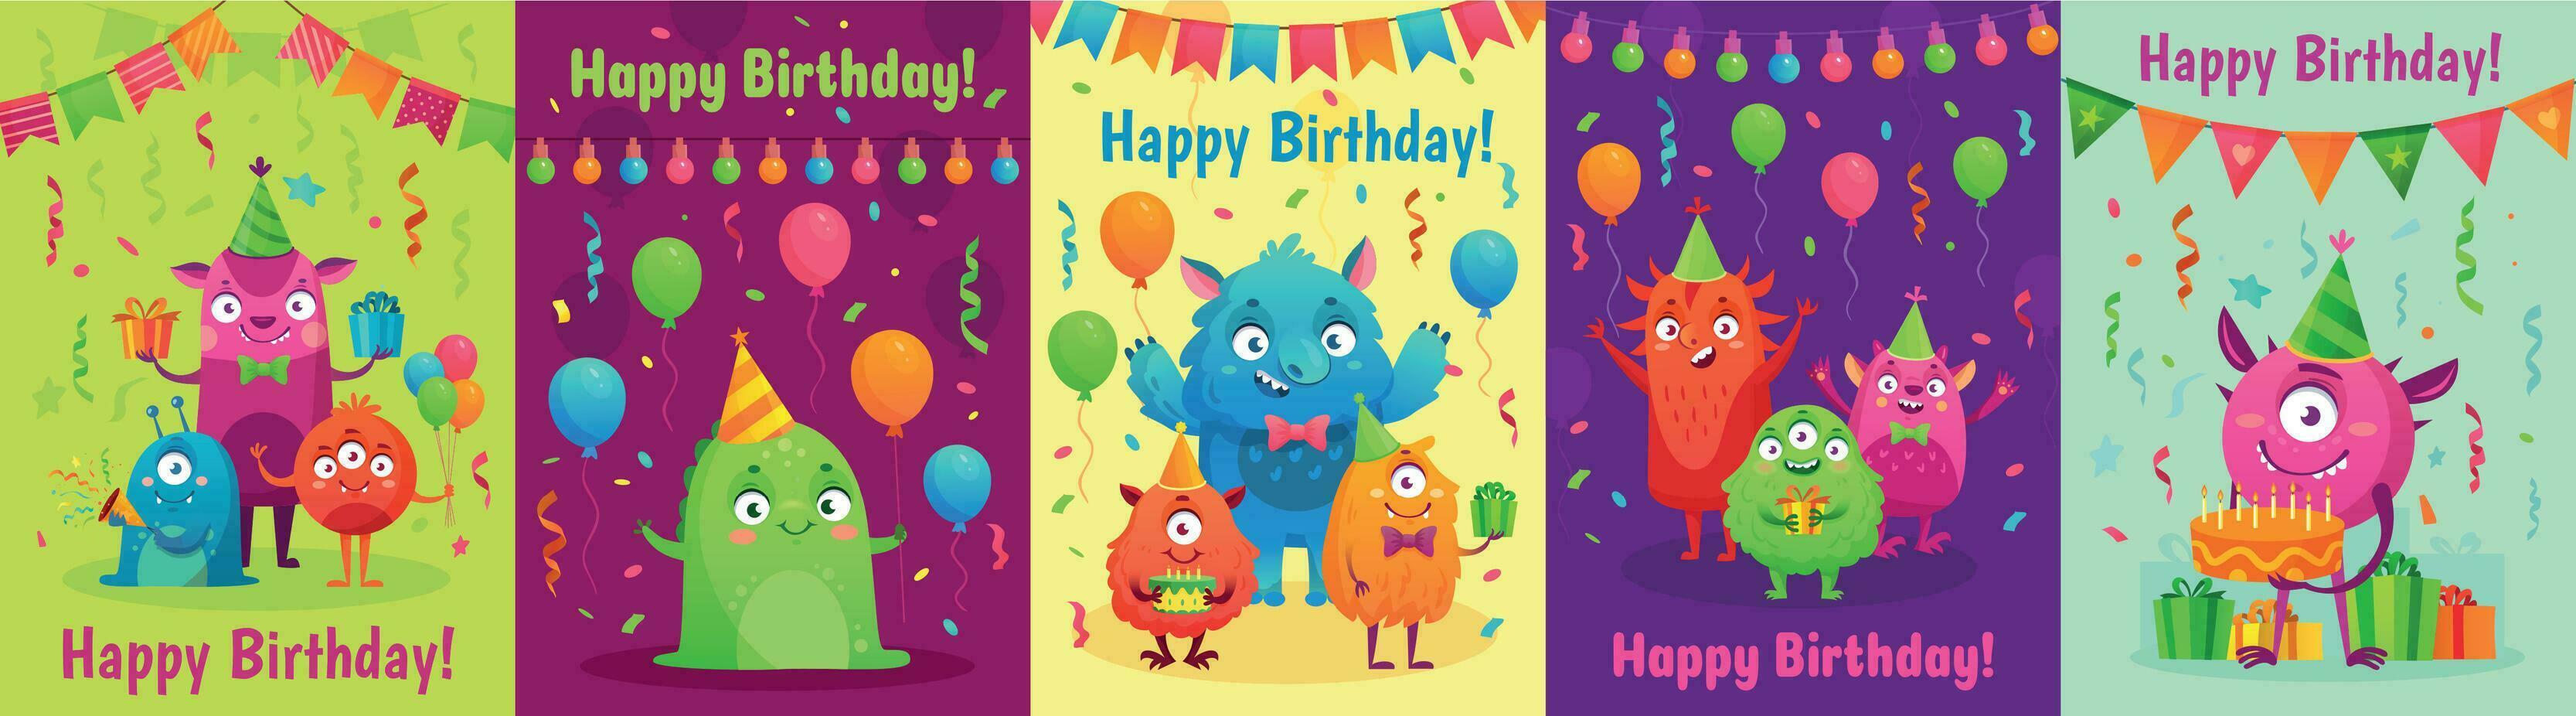 Monster birthday greeting card. Monsters with happy birthday gifts, kids party invitation and friendly monster cartoon vector set